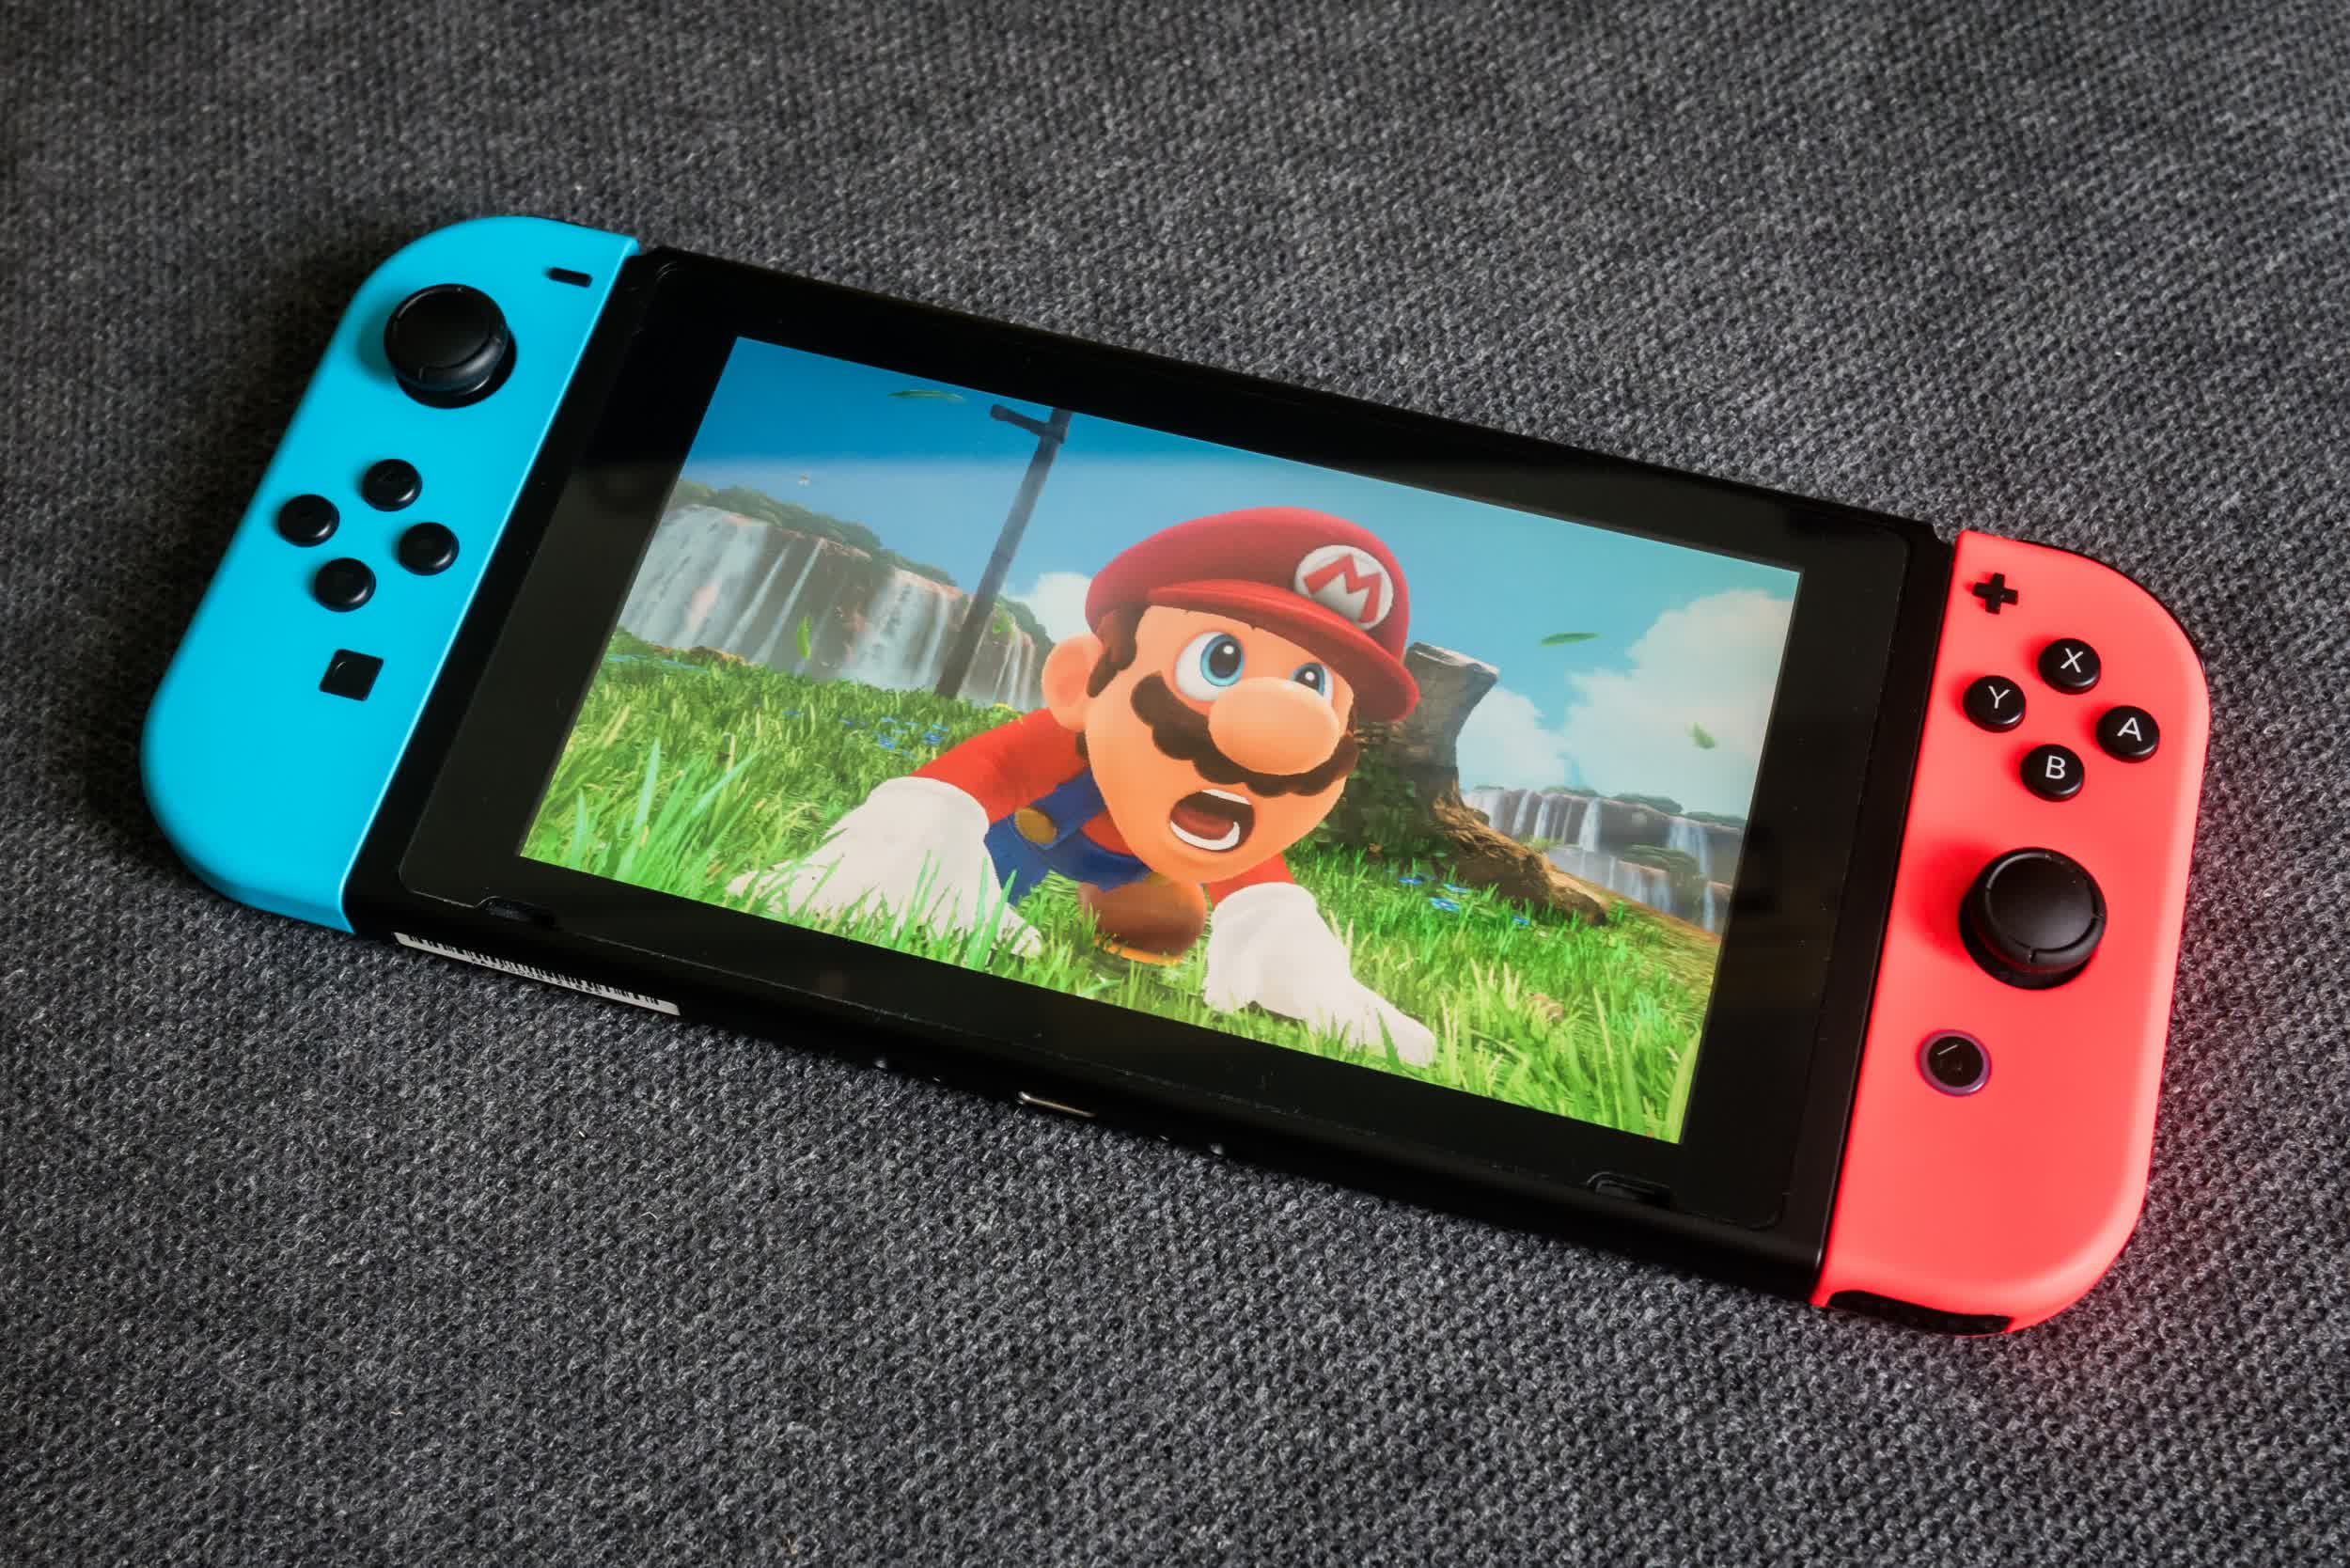 The Nintendo Switch has outsold rival consoles in the US for 23 months in a row